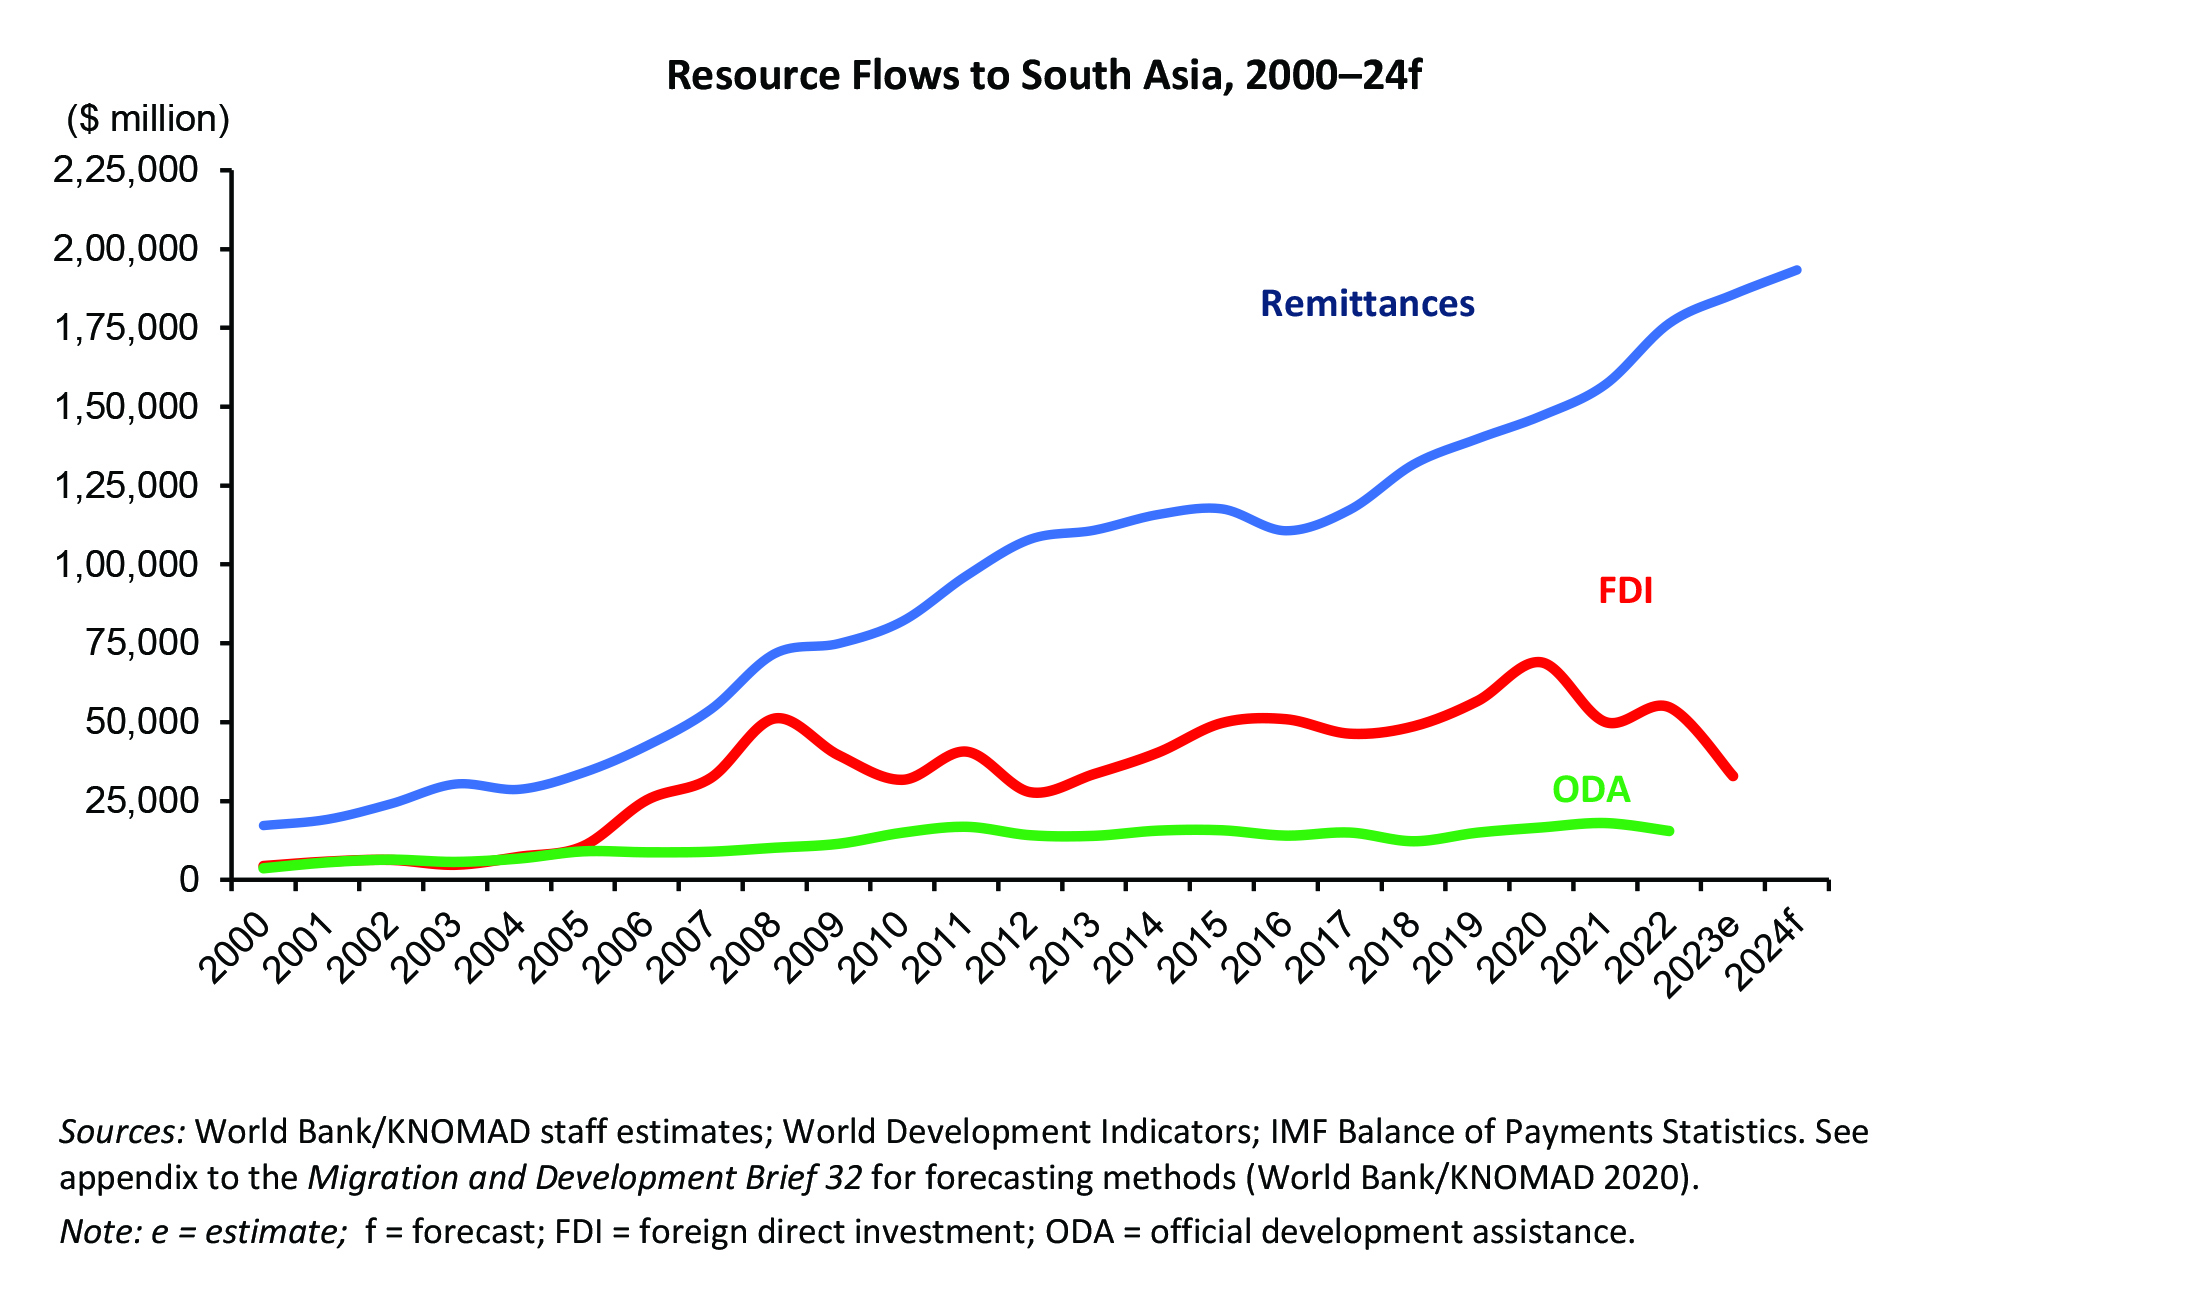 Downside risk to remittance flow to South Asia